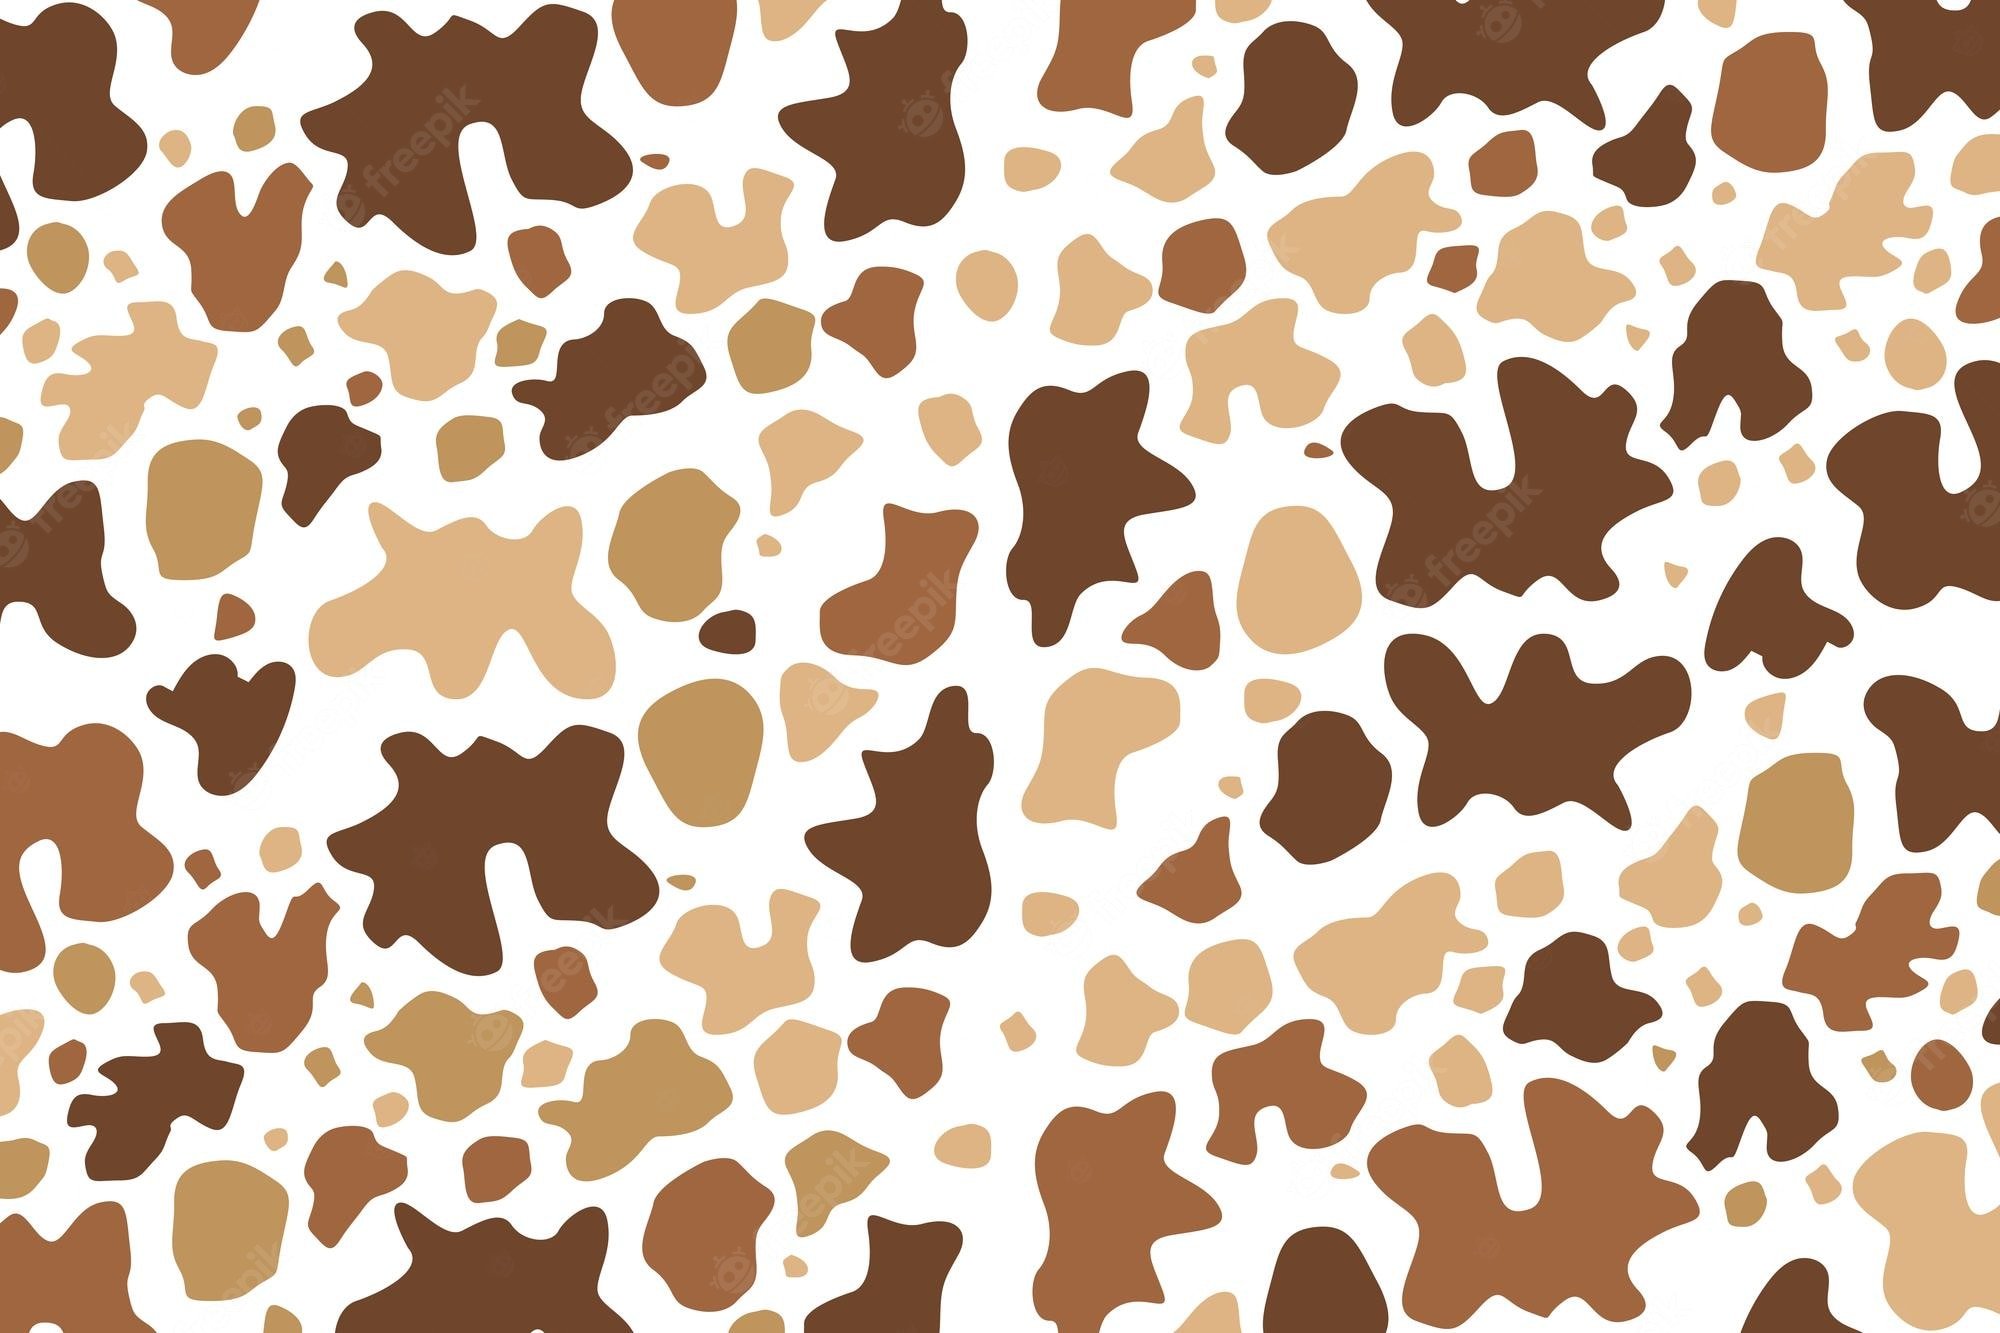 Cow skin background Vectors & Illustrations for Free Download